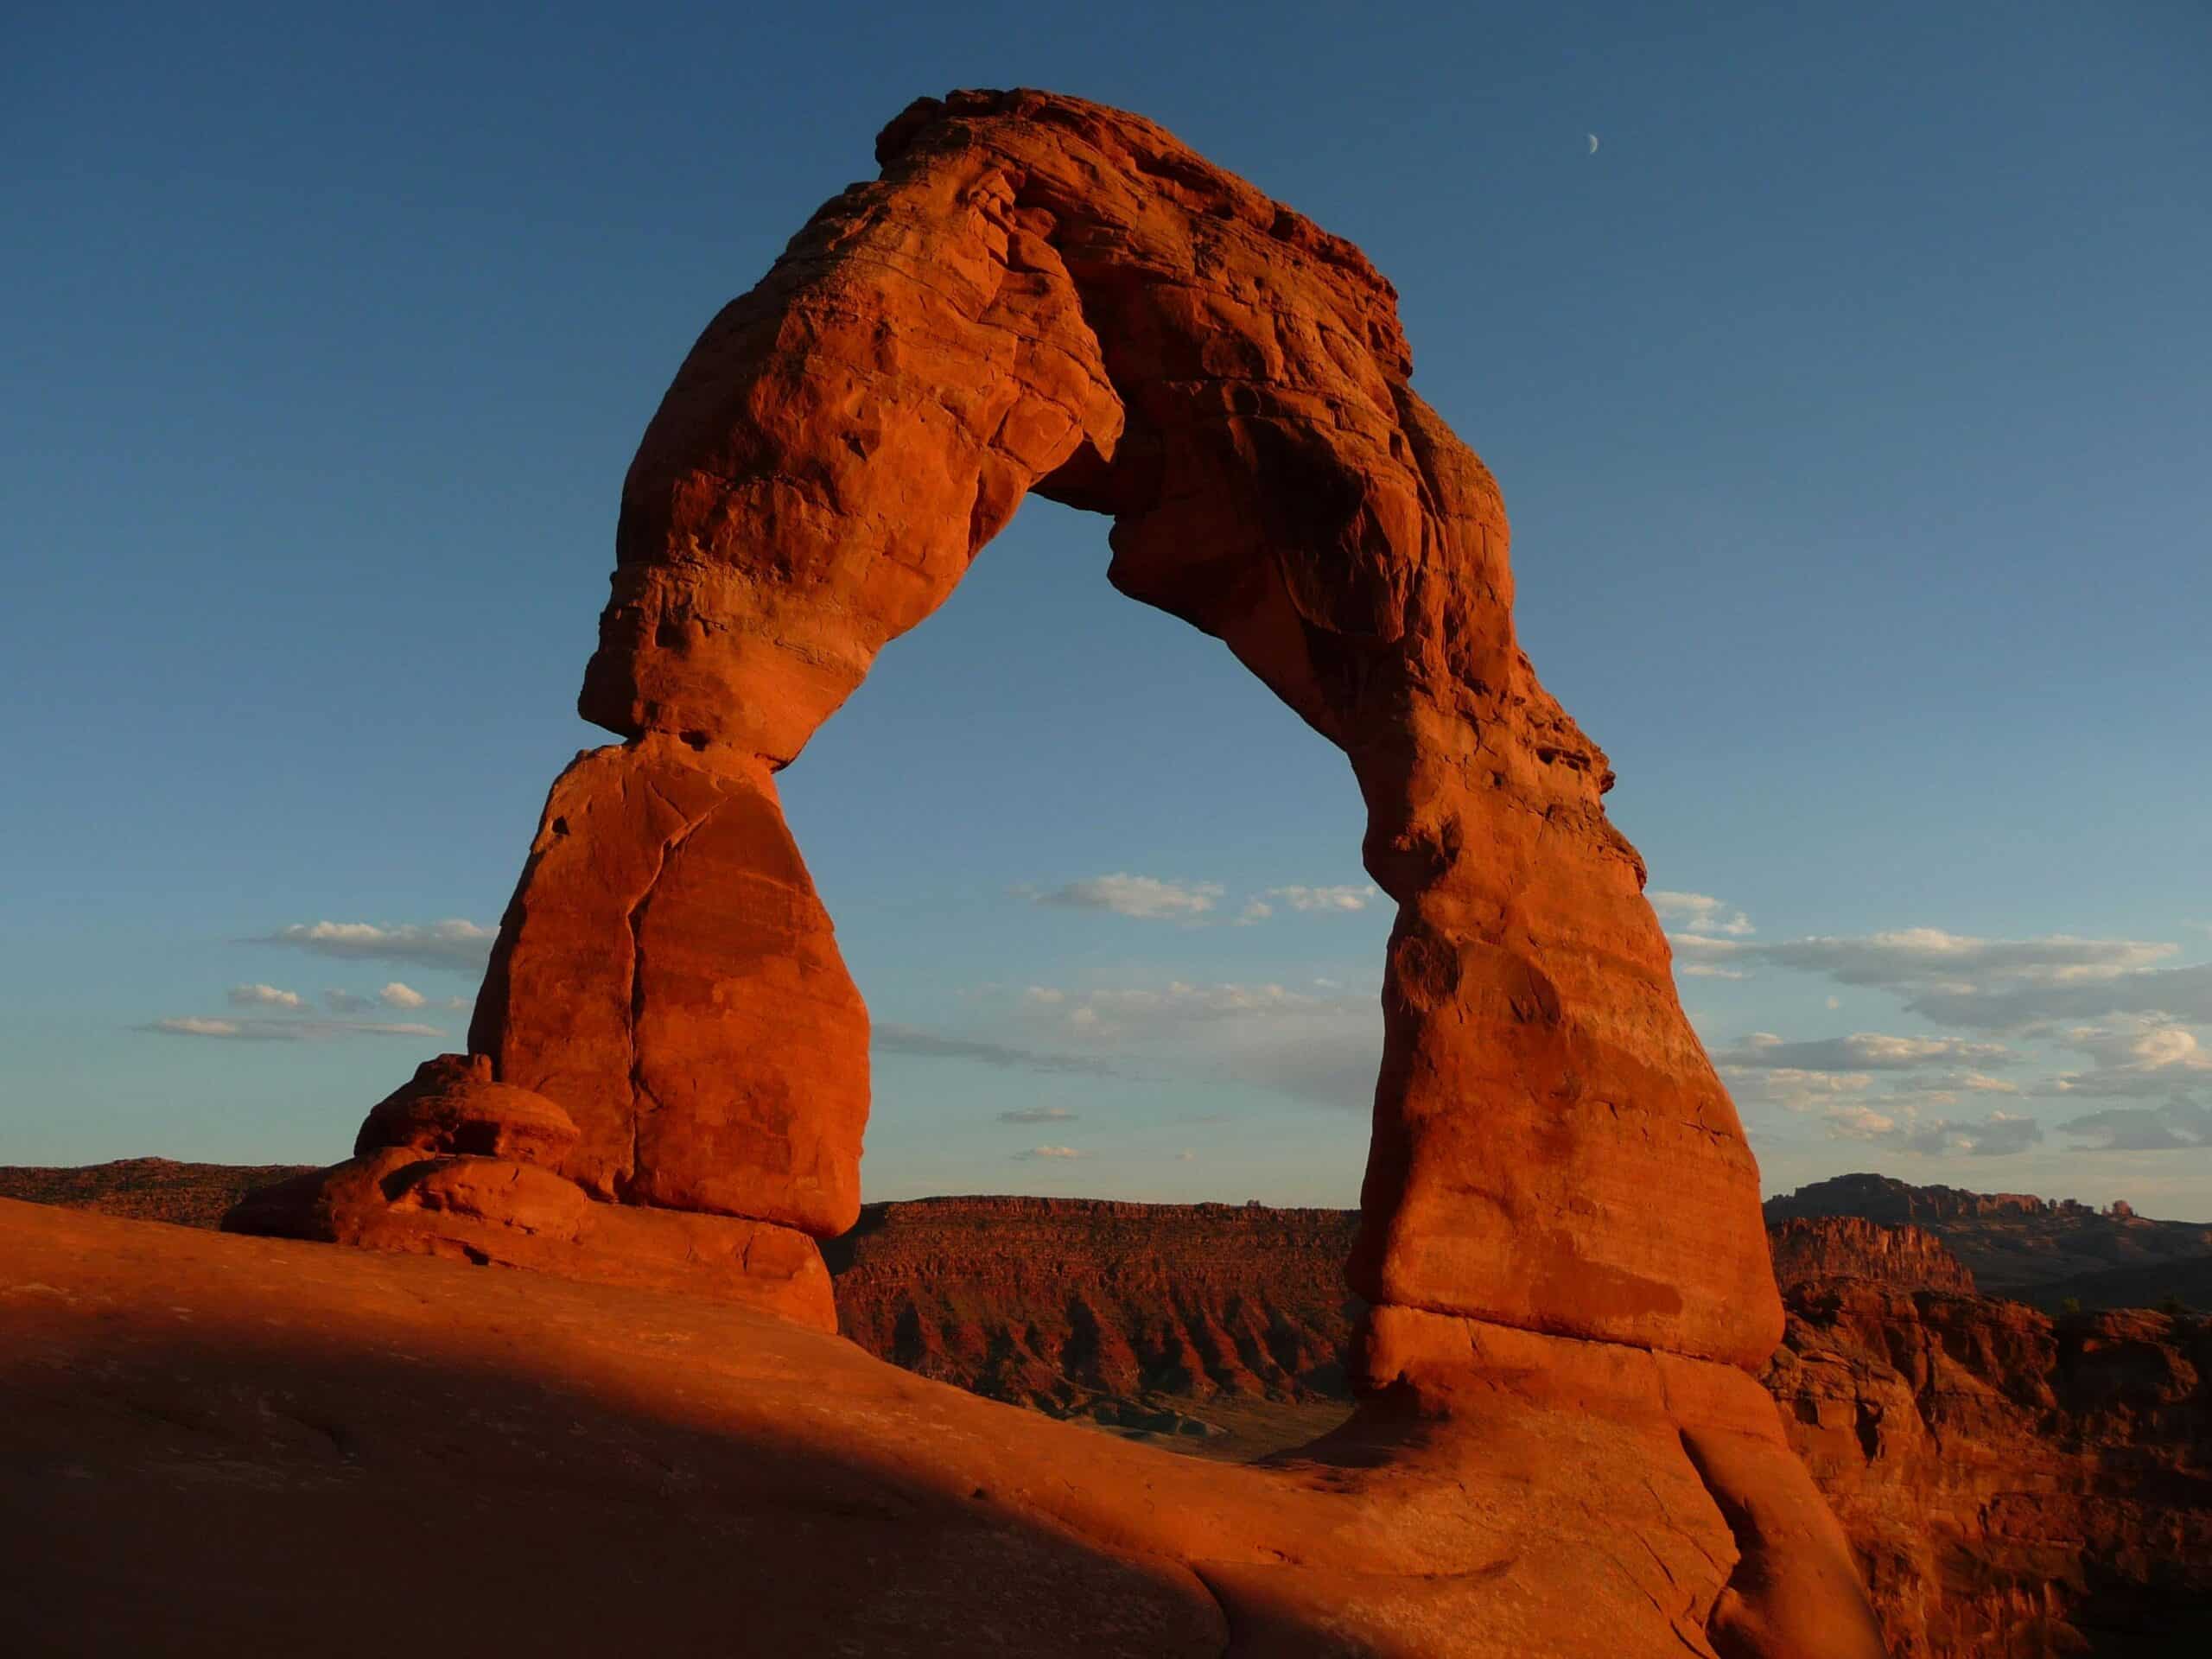 Arches National Park in located in Moab, Utah. The best time to visit this national park is spring.